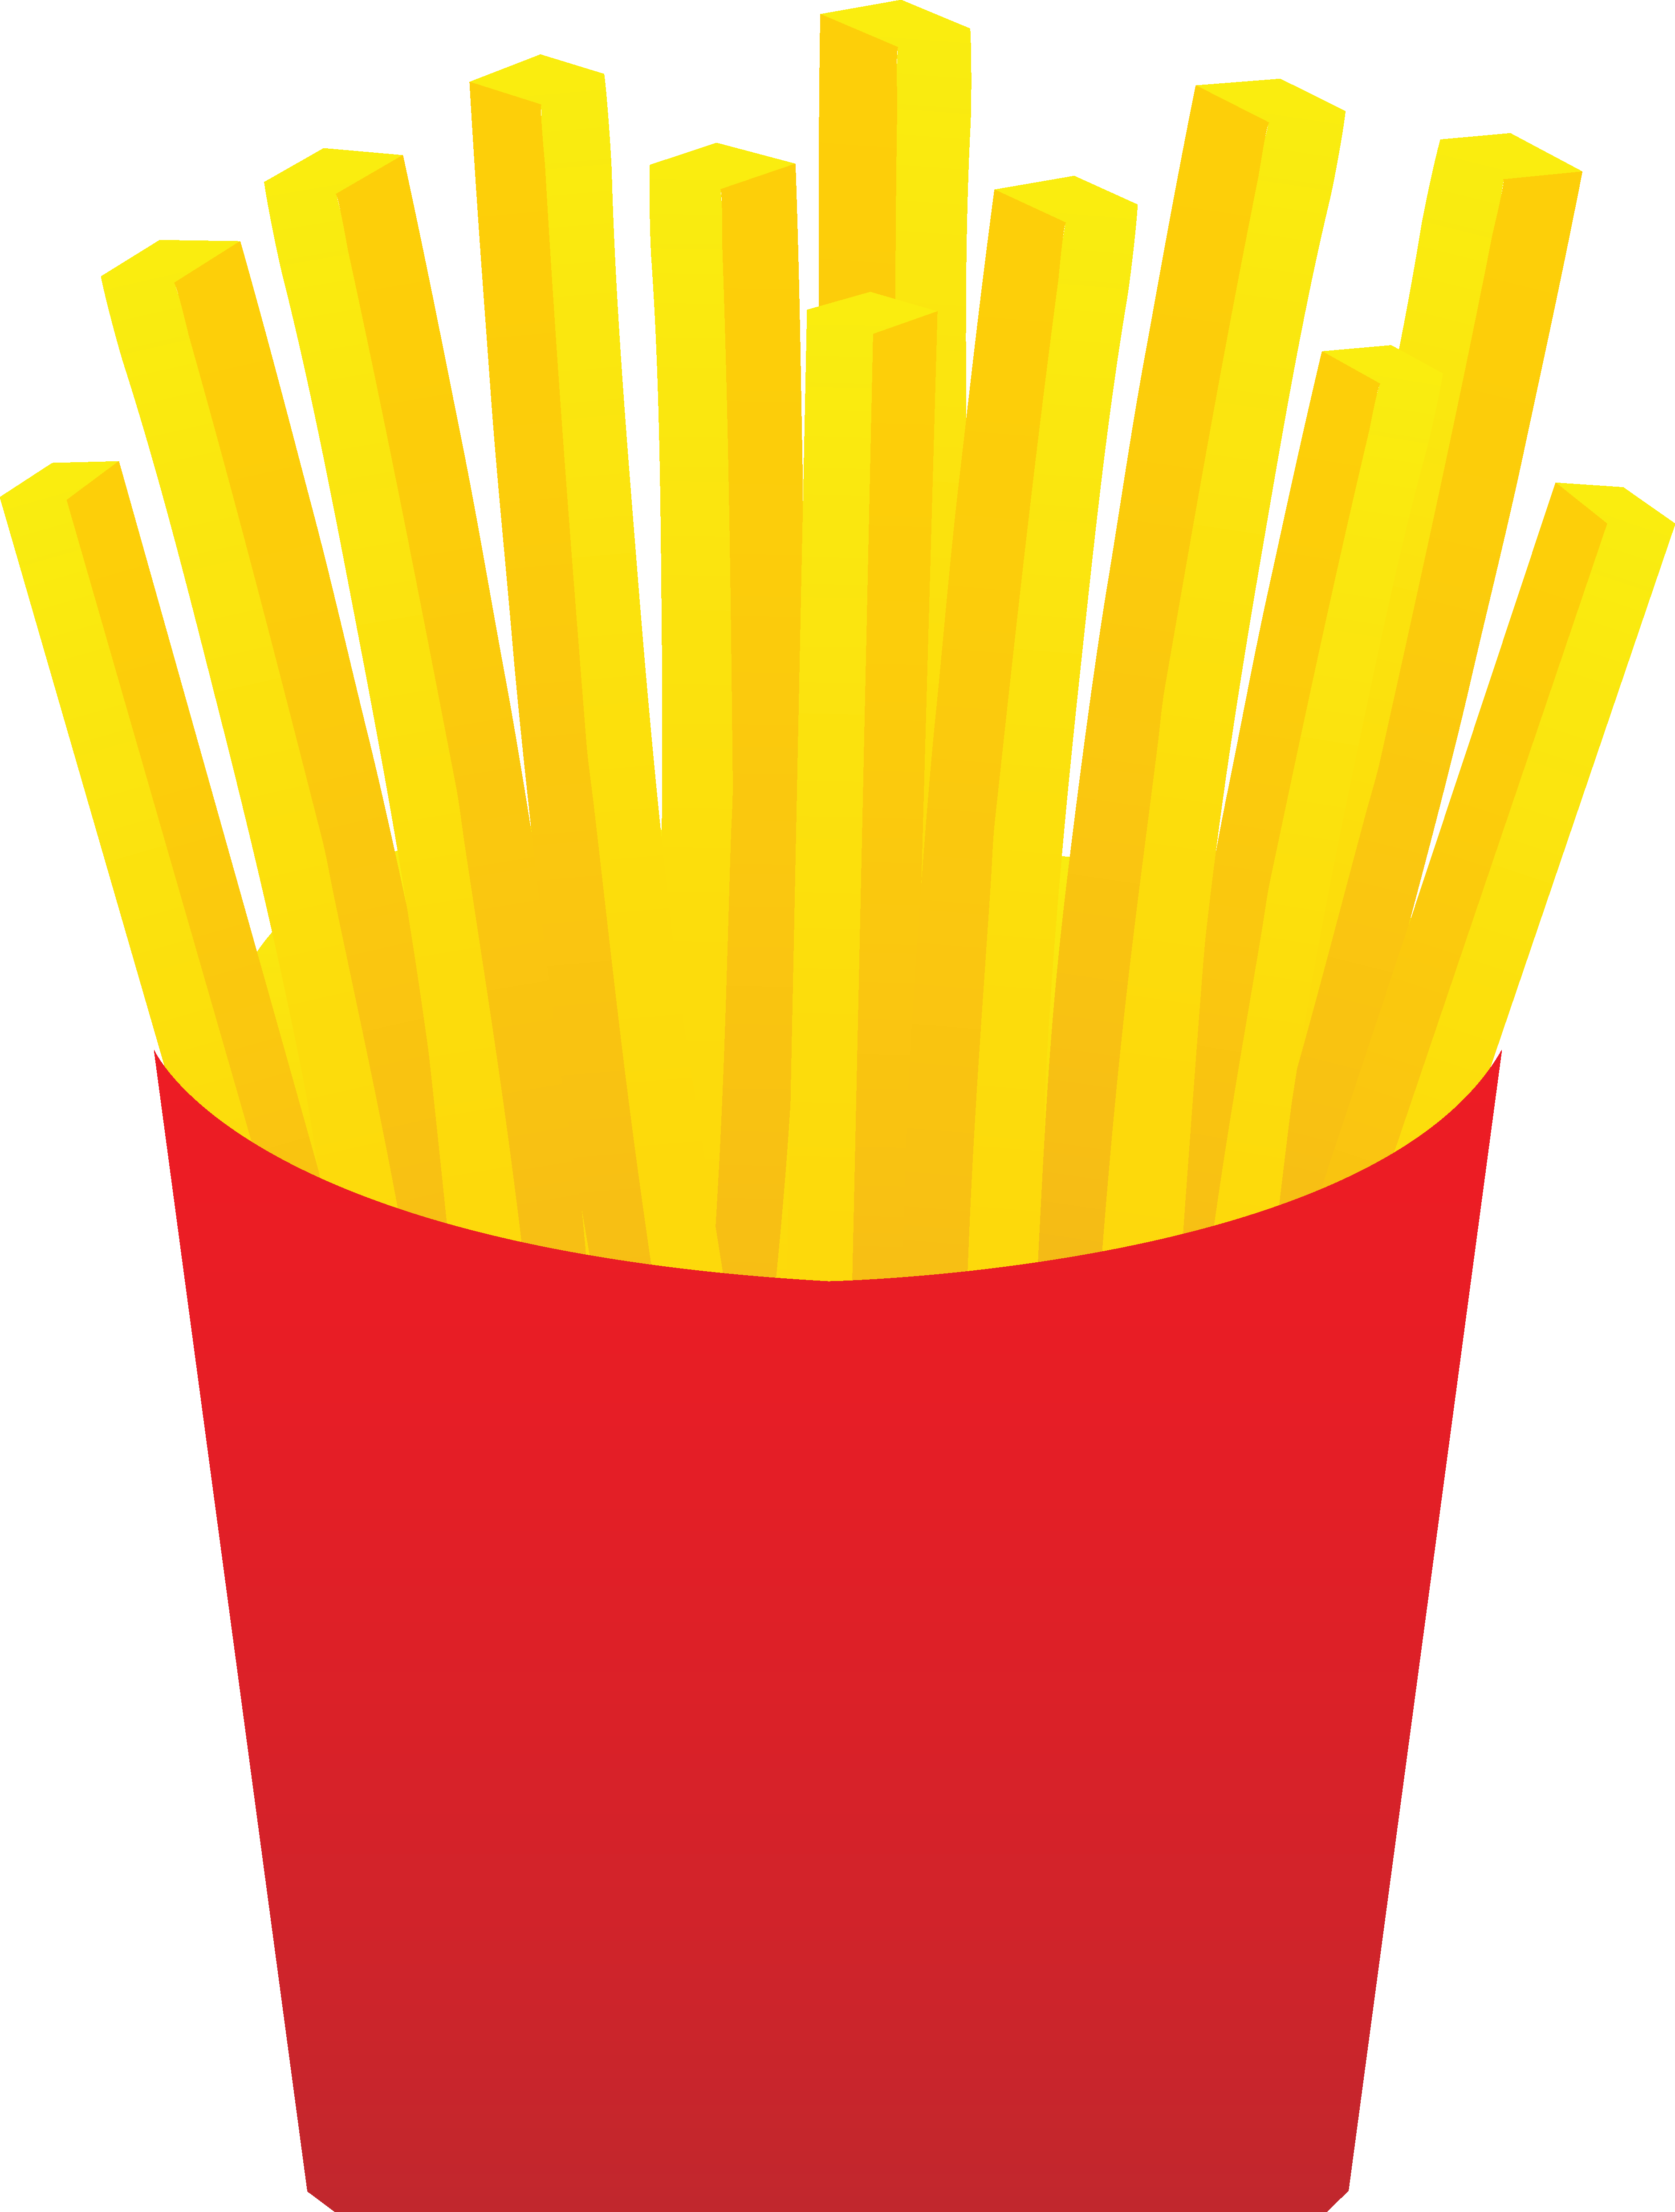 French Fry Clipart u0026 French Fry Clip Art Images - ClipartALL clipartall.com